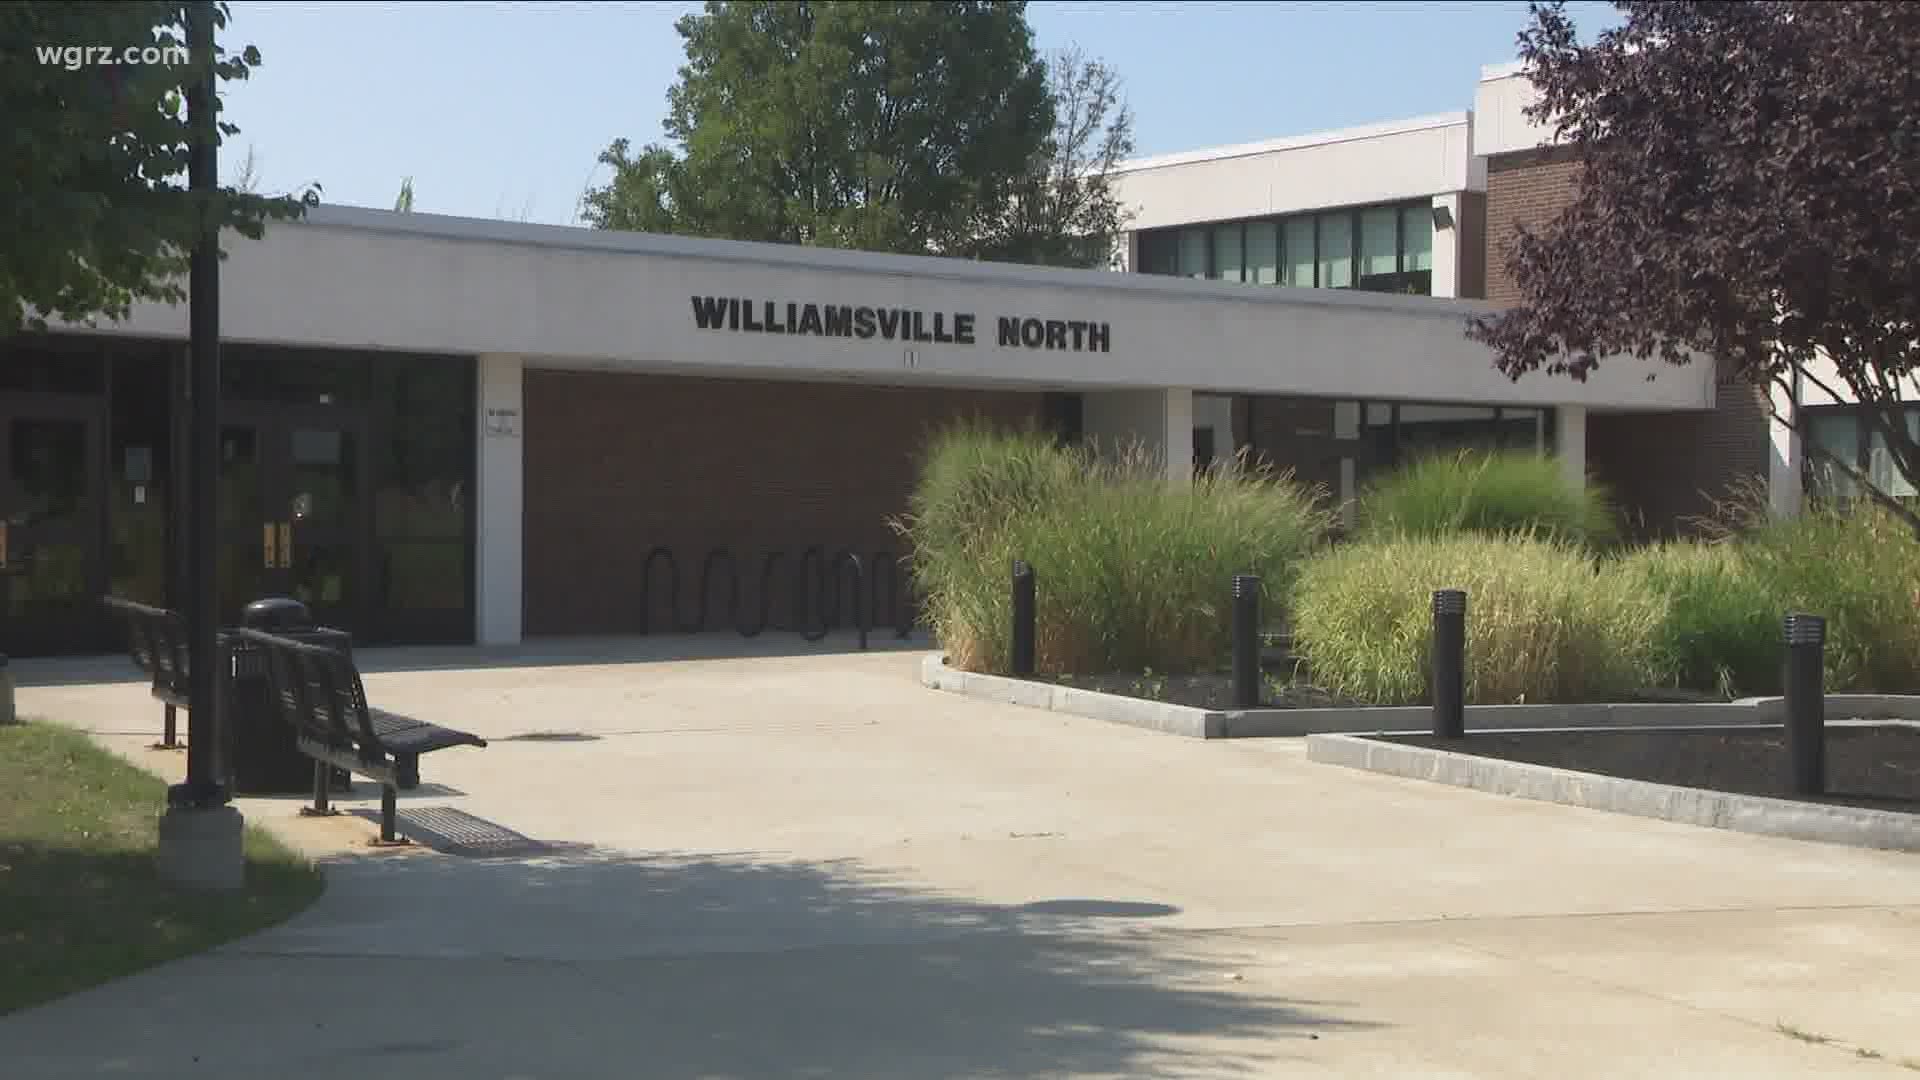 Today that the Williamsville School Board was unaware of the superintendent's decision to delay the start of school for some remote learners.